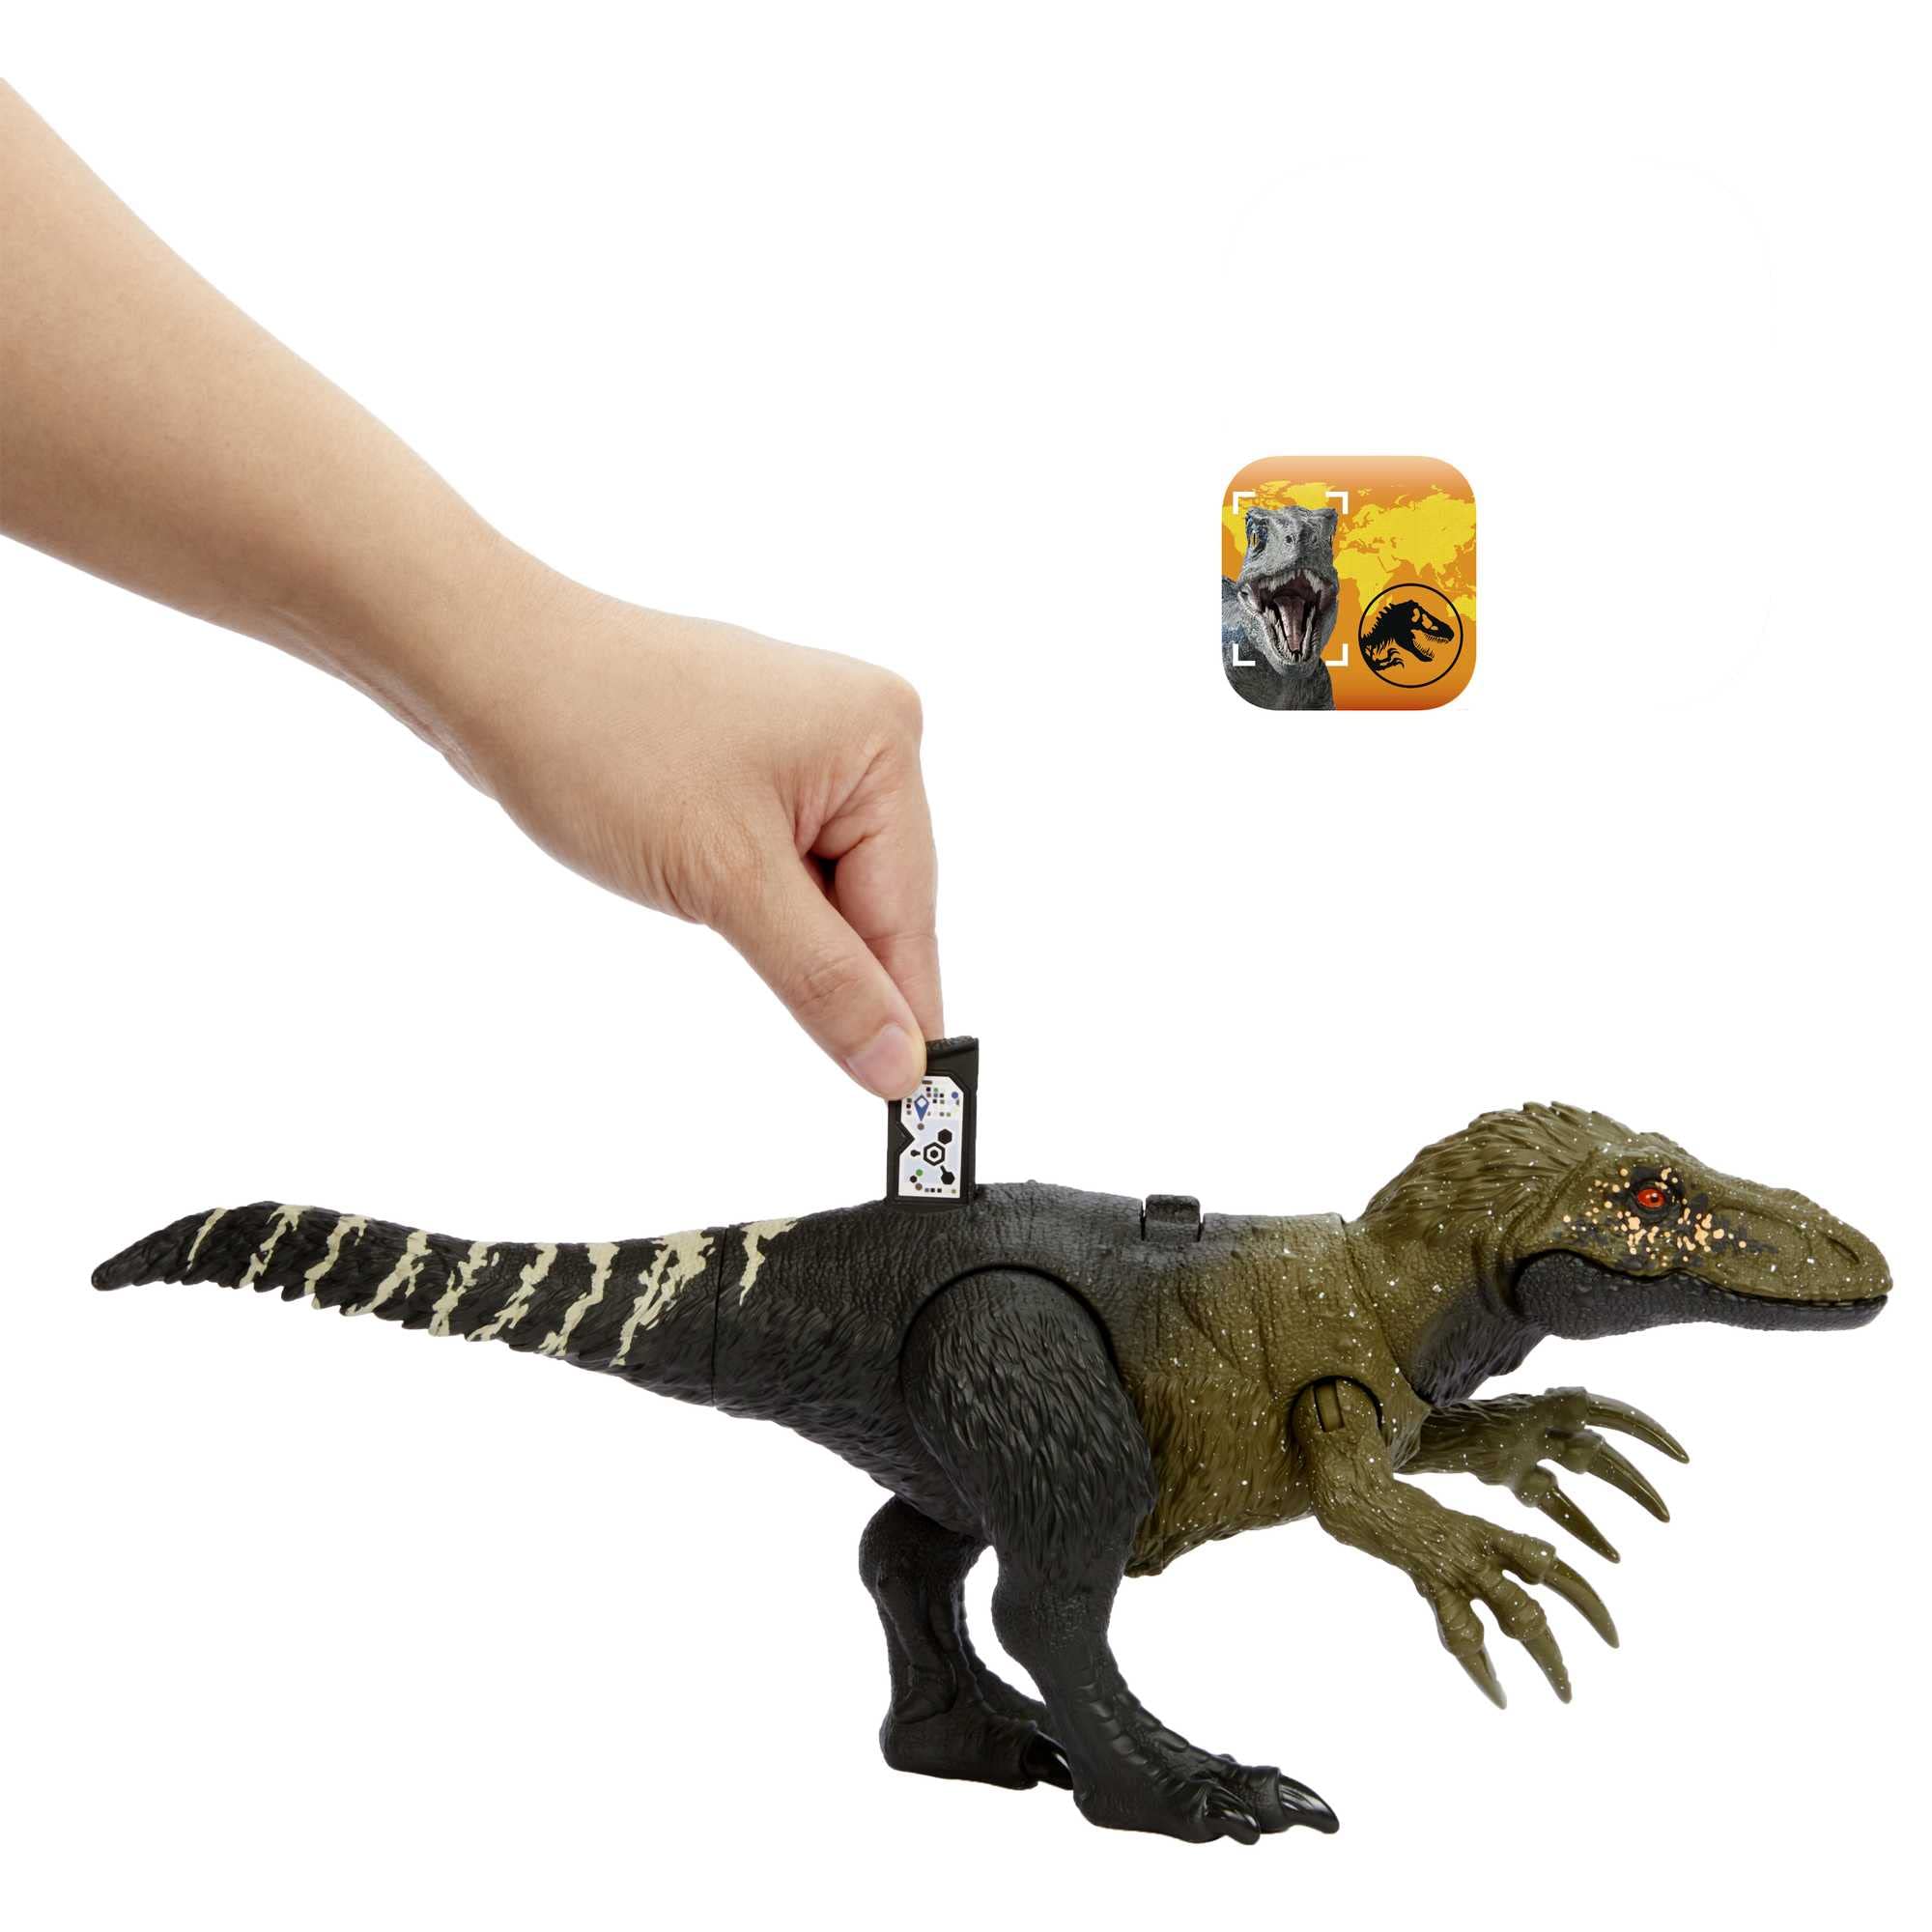 Jurassic World Dinosaur Toy Orkoraptor with Roar Sound & Attack Action, Wild Roar Posable Figure, Physical & Connected Digital Play